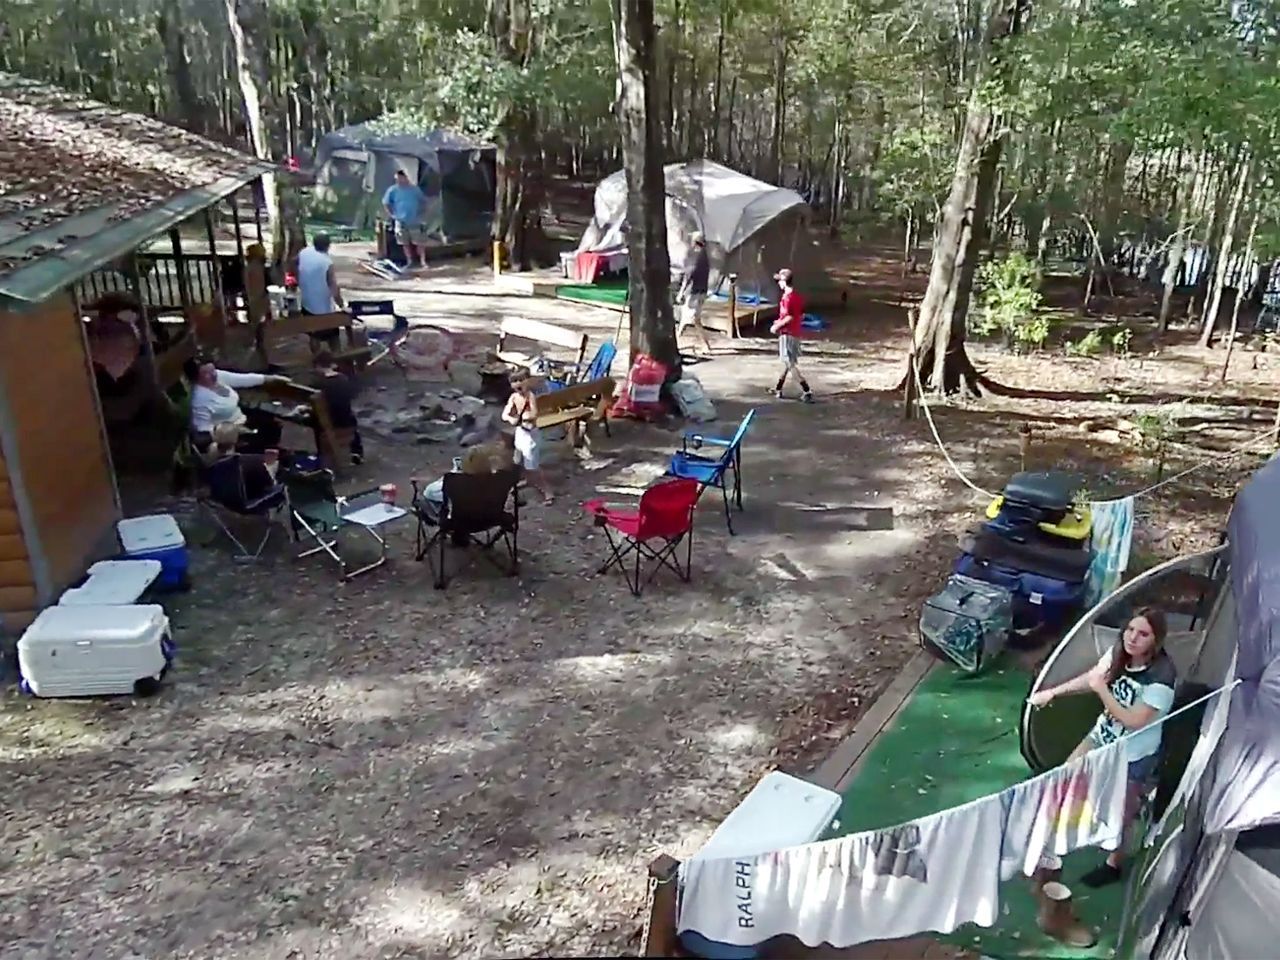 a group of people are camping in the woods .